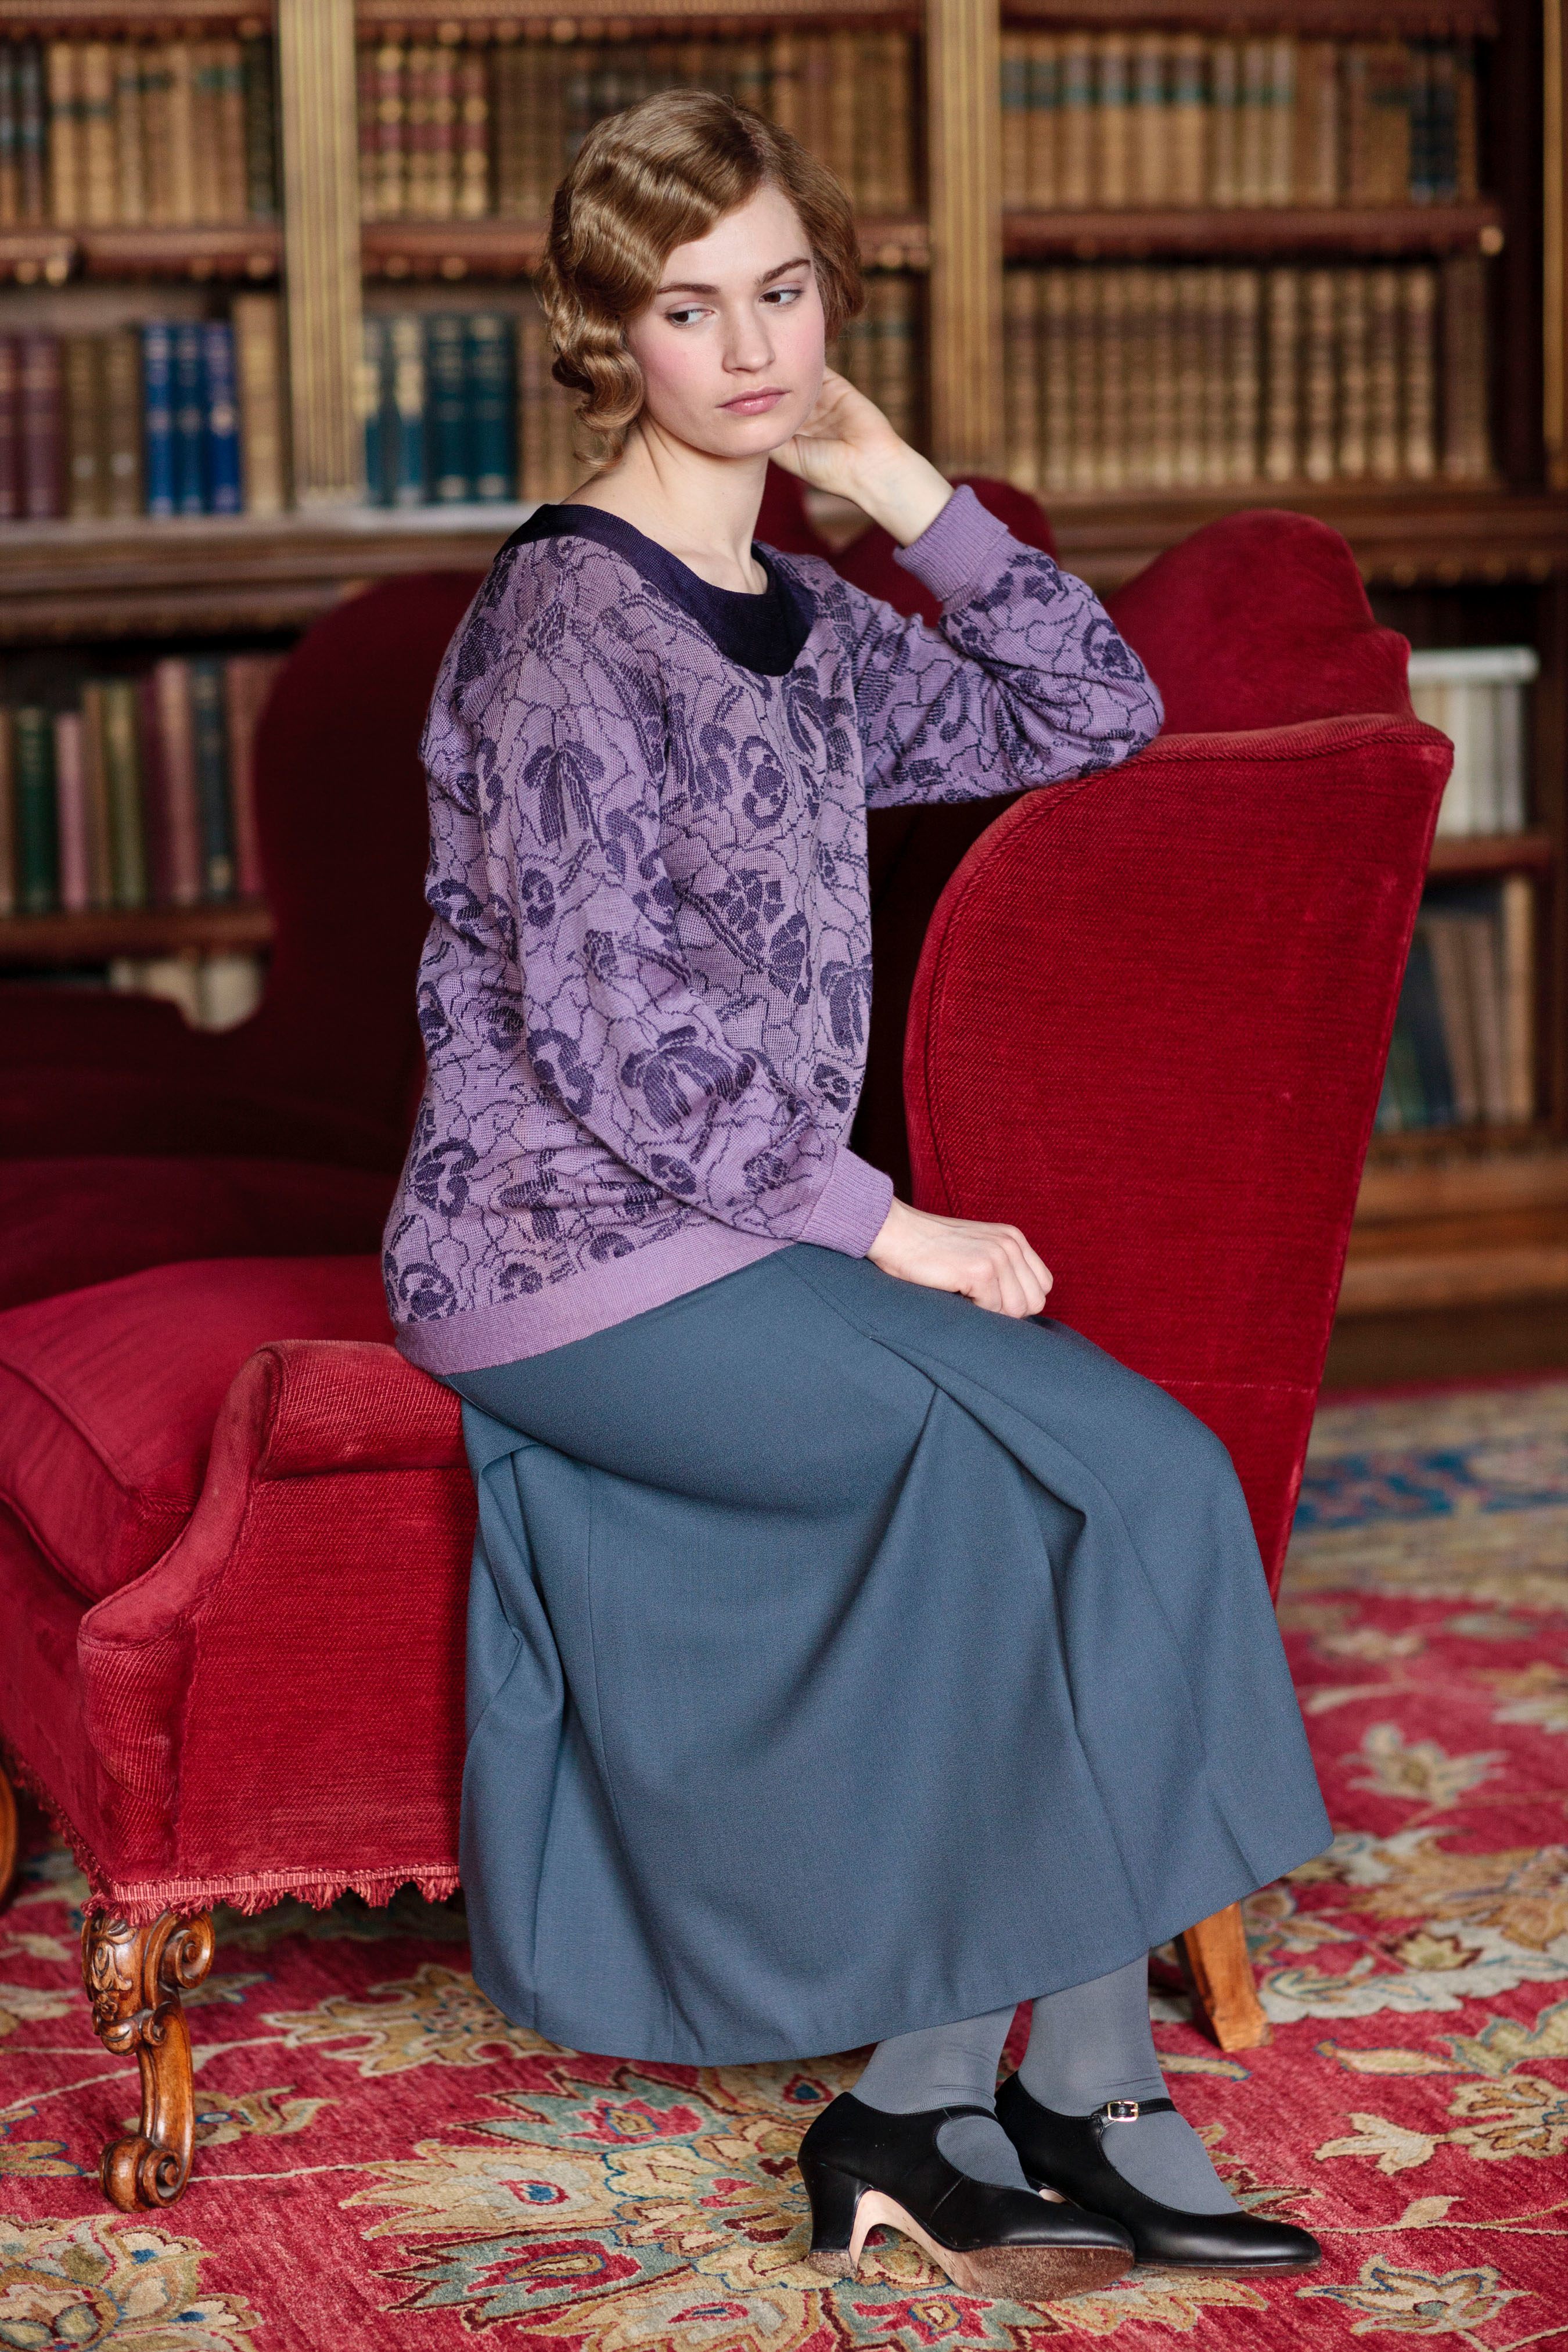 Woman posing in a vintage style purple blouse and grey skirt, seated on a red chair in a library